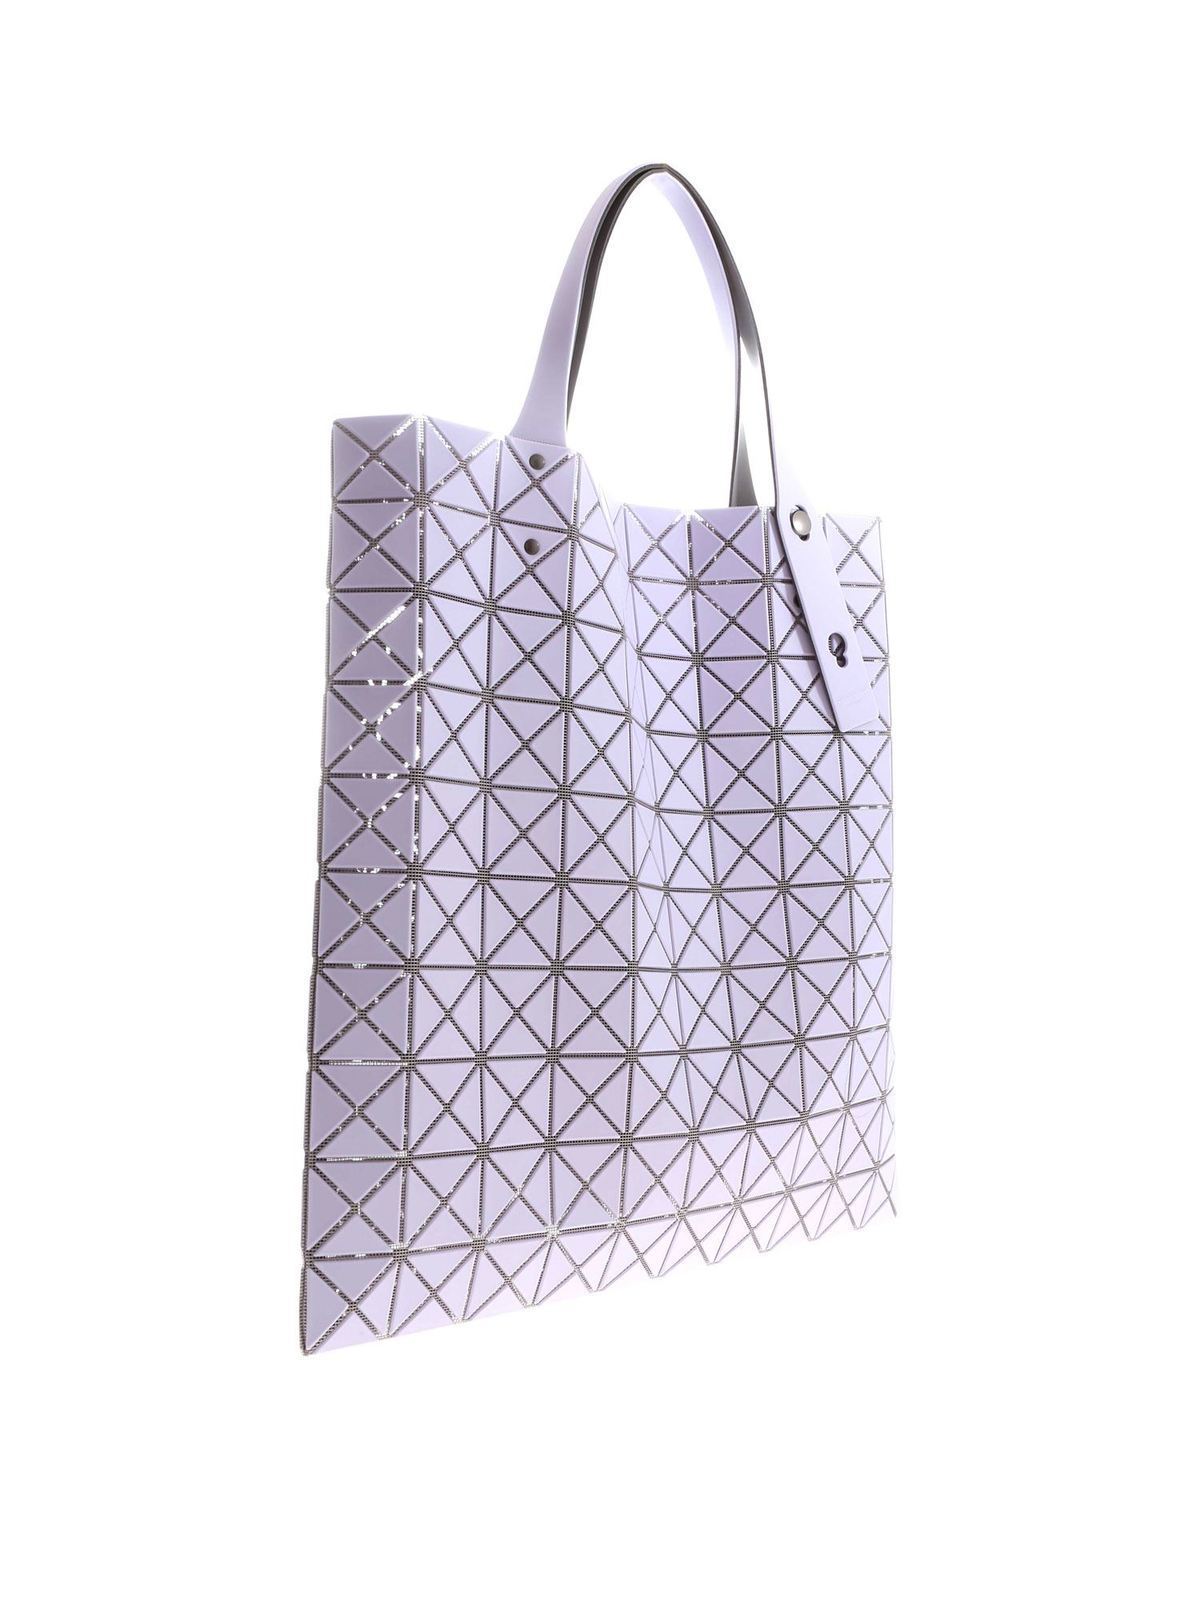 BAO BAO Issey Miyake - Prism Frost tote in lilac - totes bags - BB06AG50380